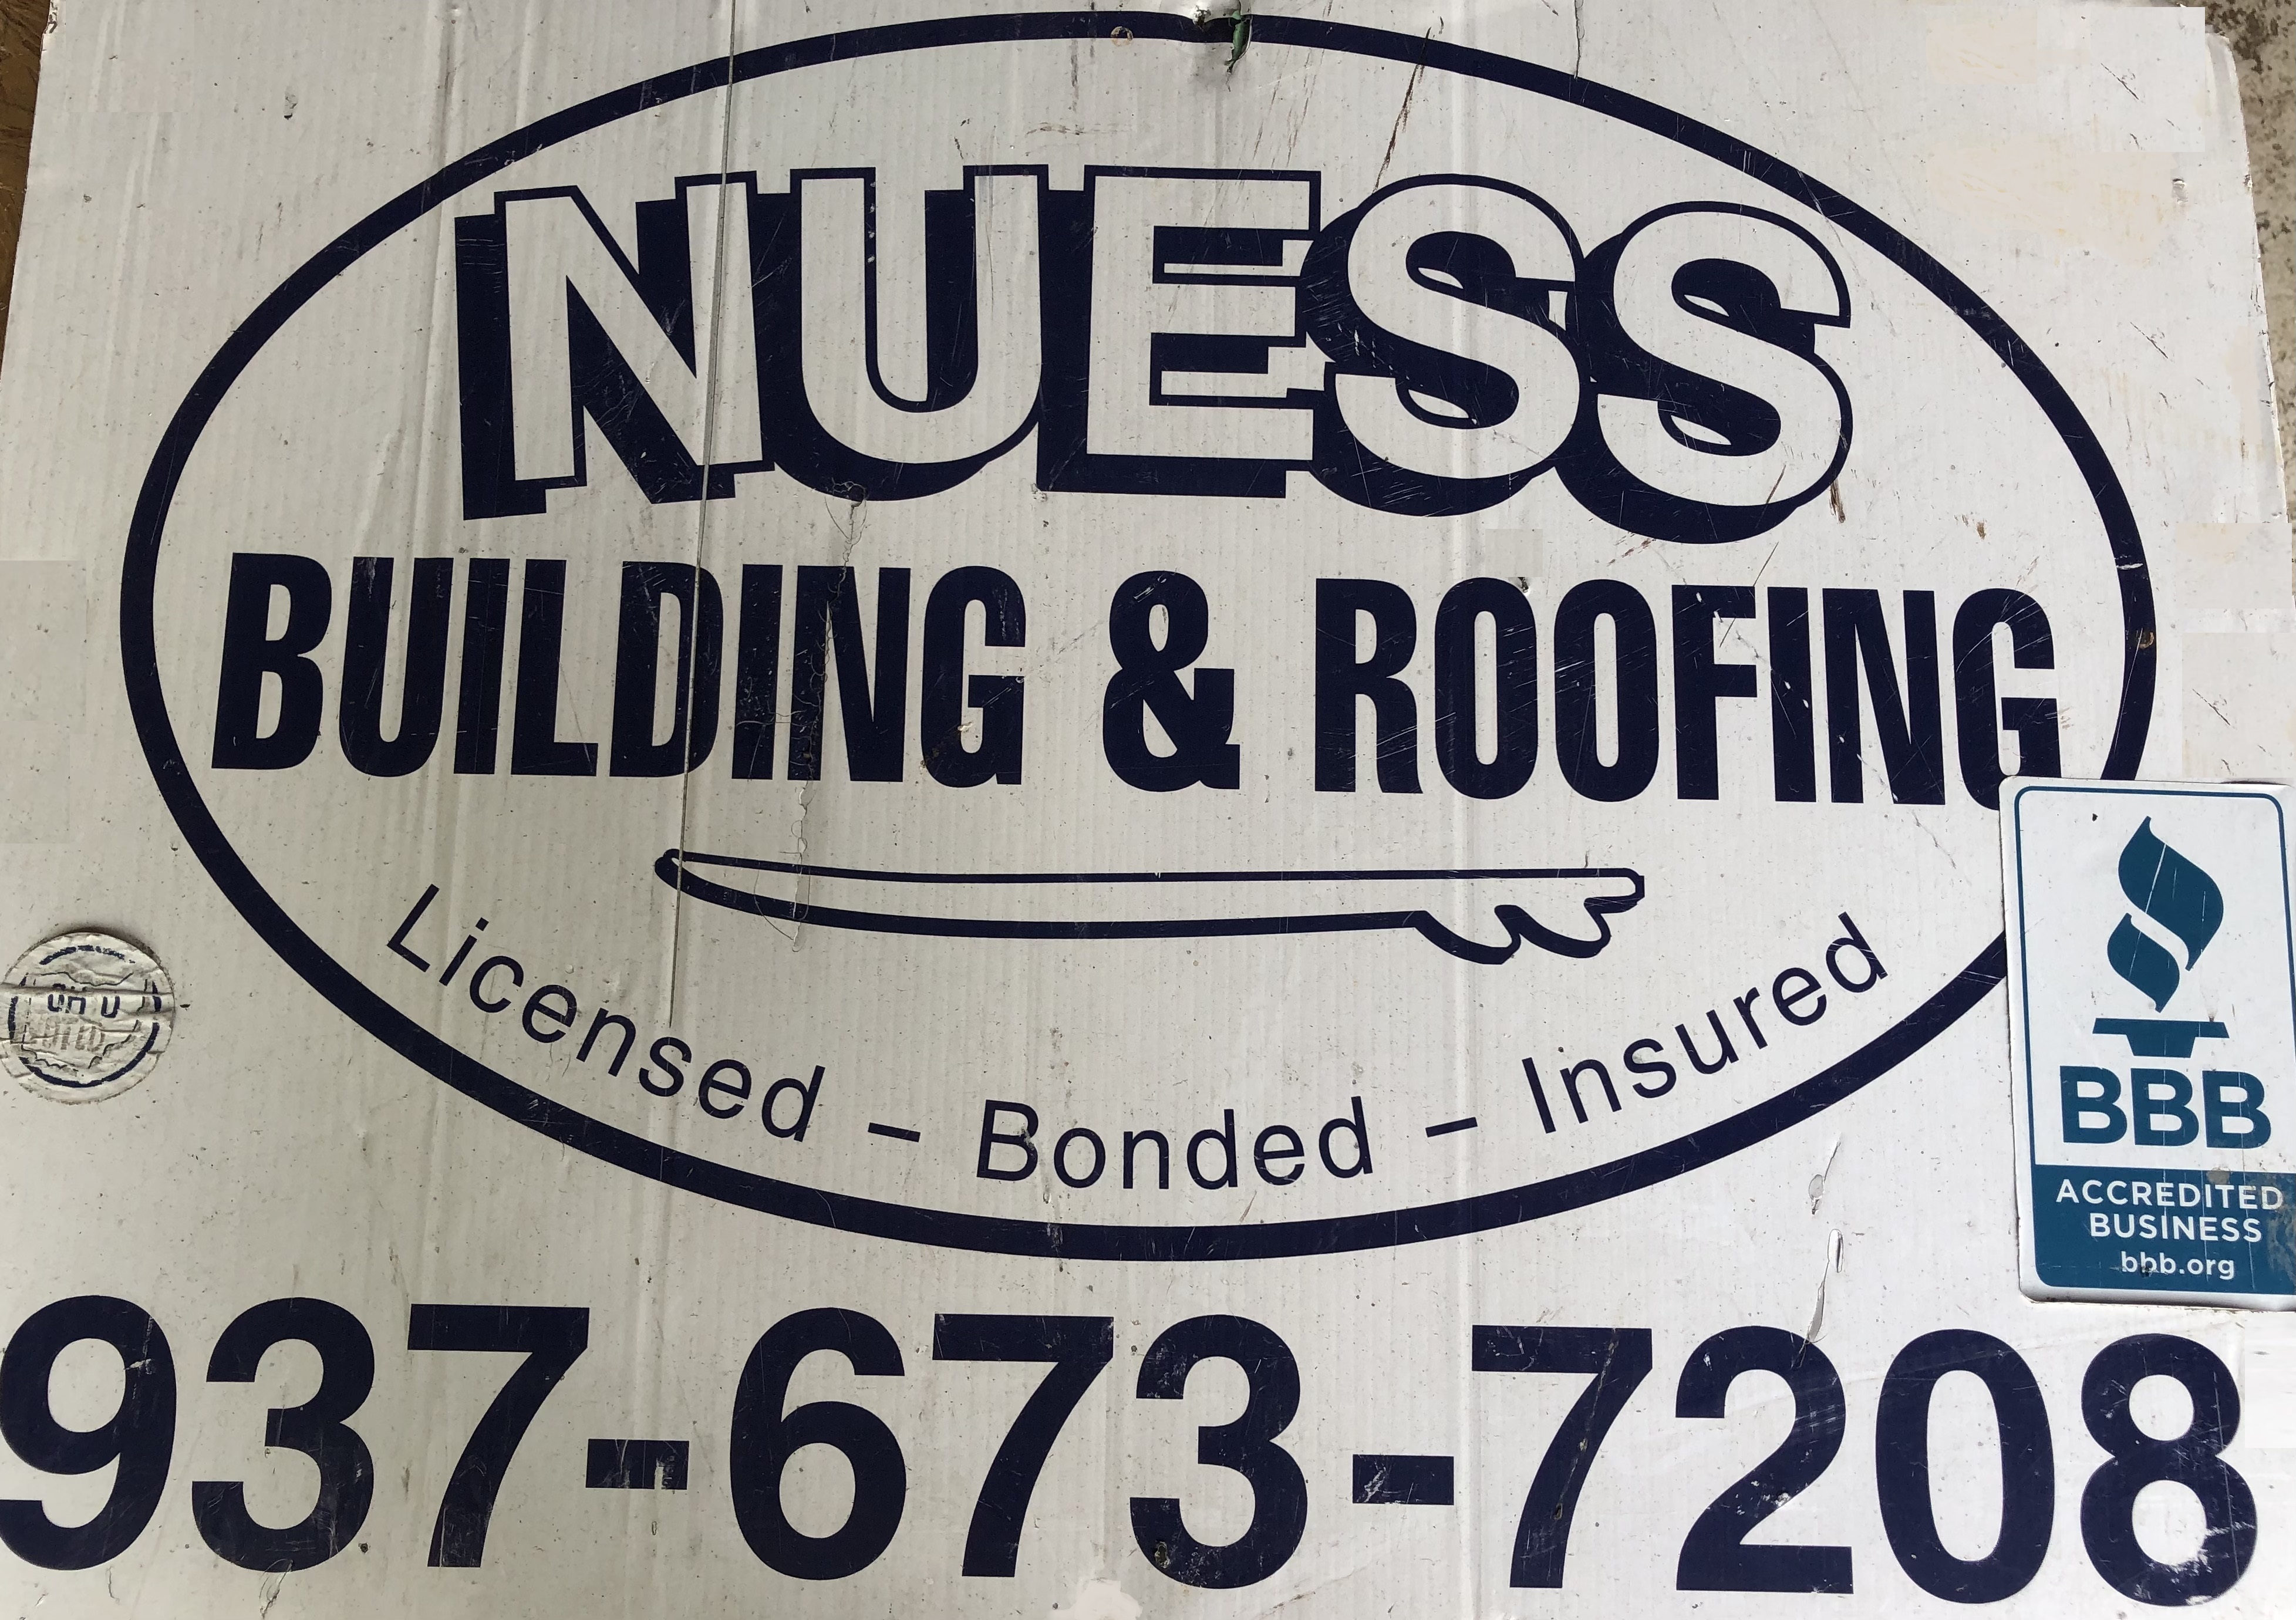 Richard Nuess Building and Roofing Contractor, Inc. Logo